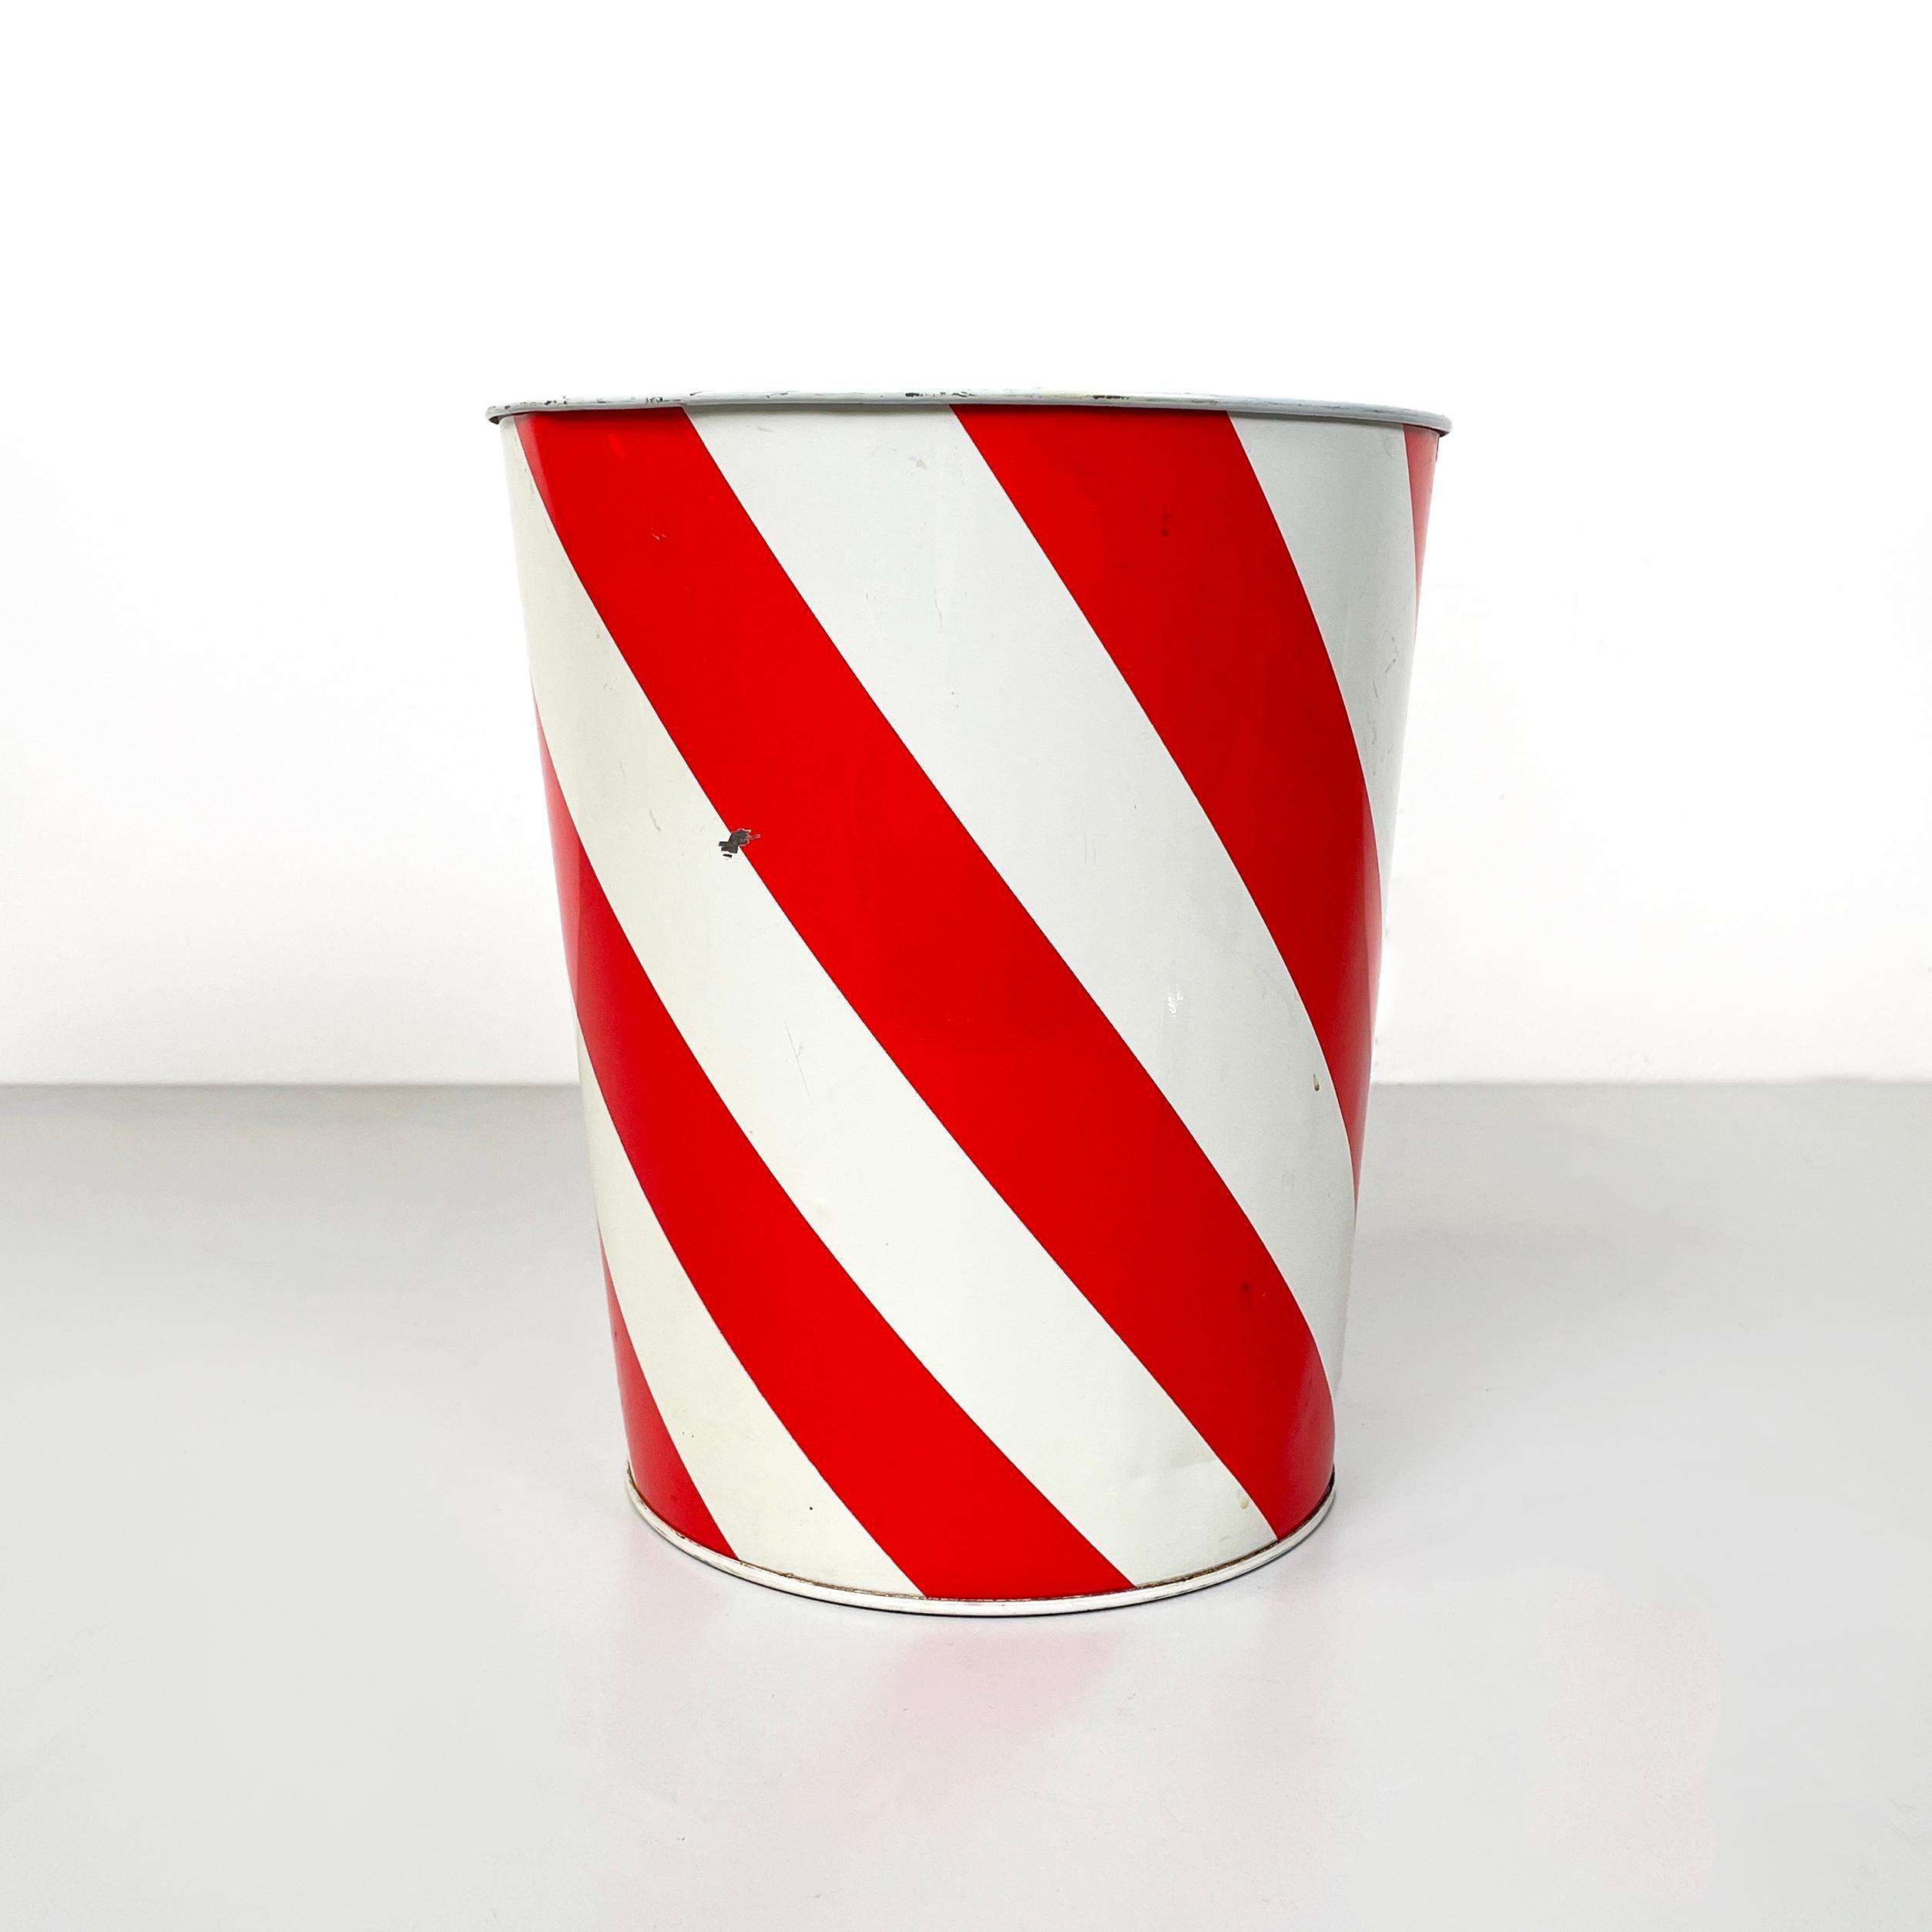 England modern Round wastepaper basket in red and white metal, 1990s
Round-based wastepaper basket in painted metal with red and white spiral stripes design. The upper profile is rounded. The structure tends to tighten toward the base. It can be